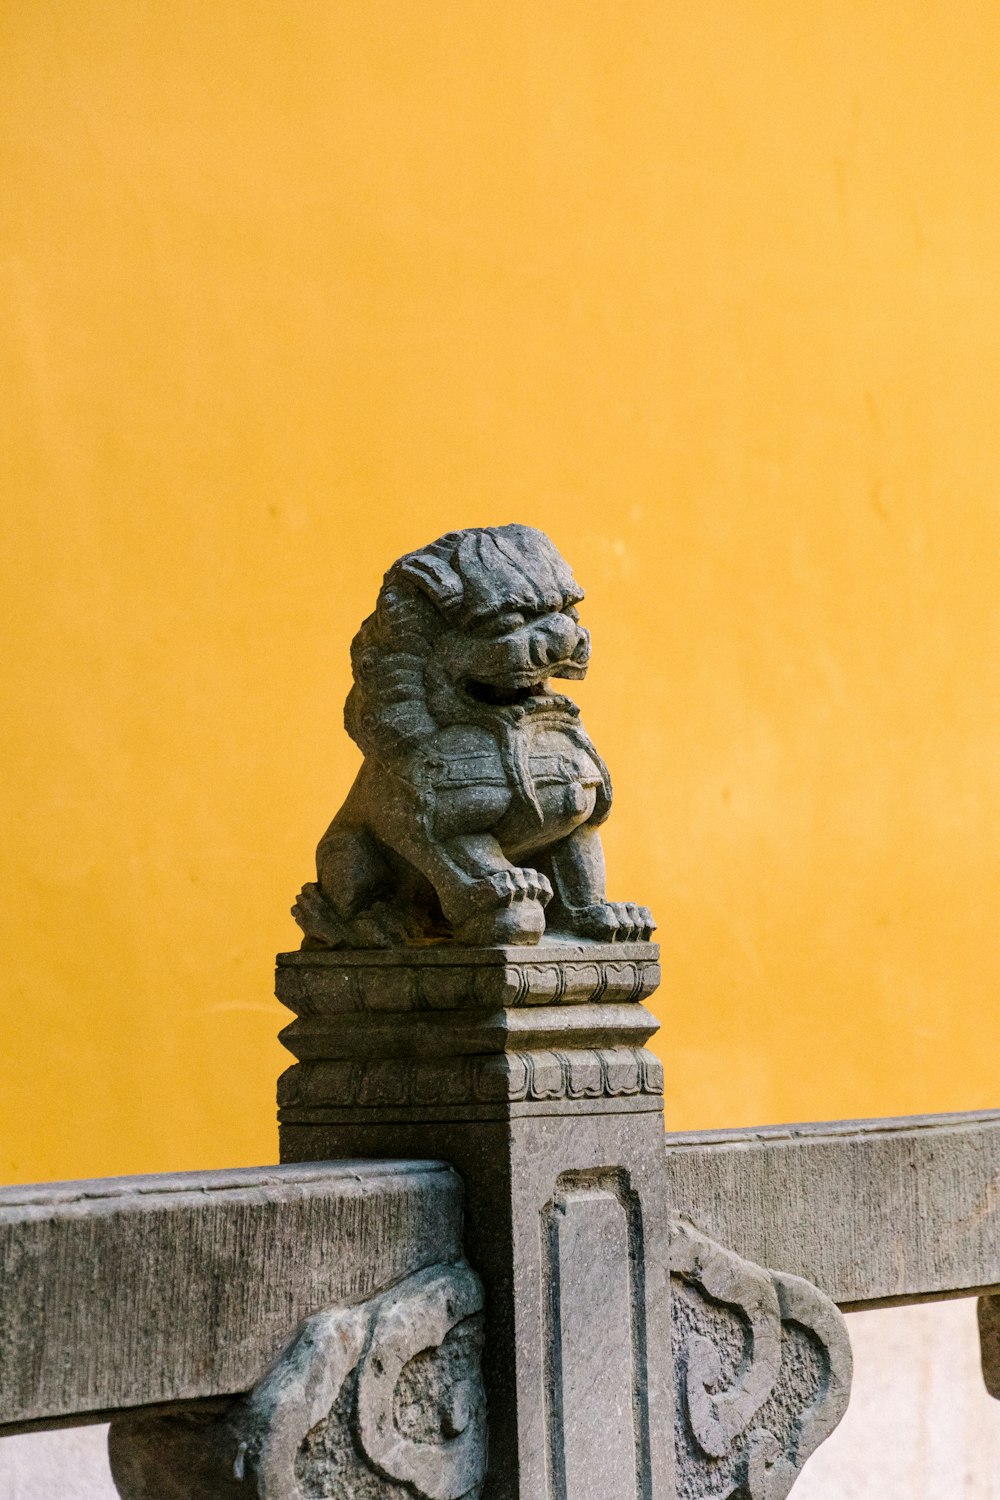 a statue of a lion sitting on top of a fence